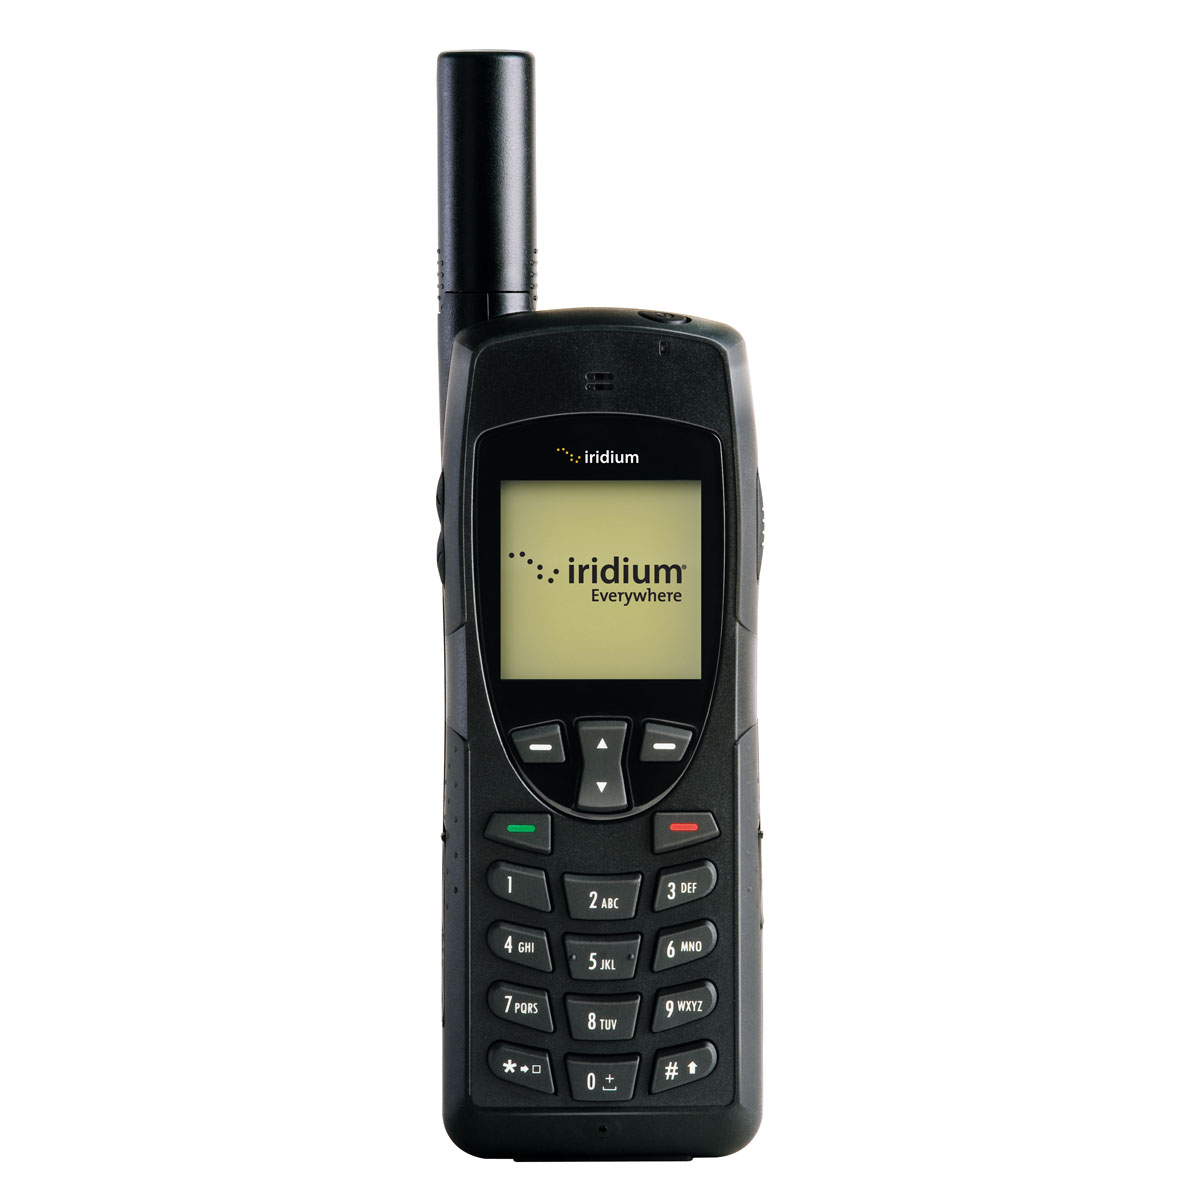 Top 5 Reasons Why You Need Satellite Phones While Travelling